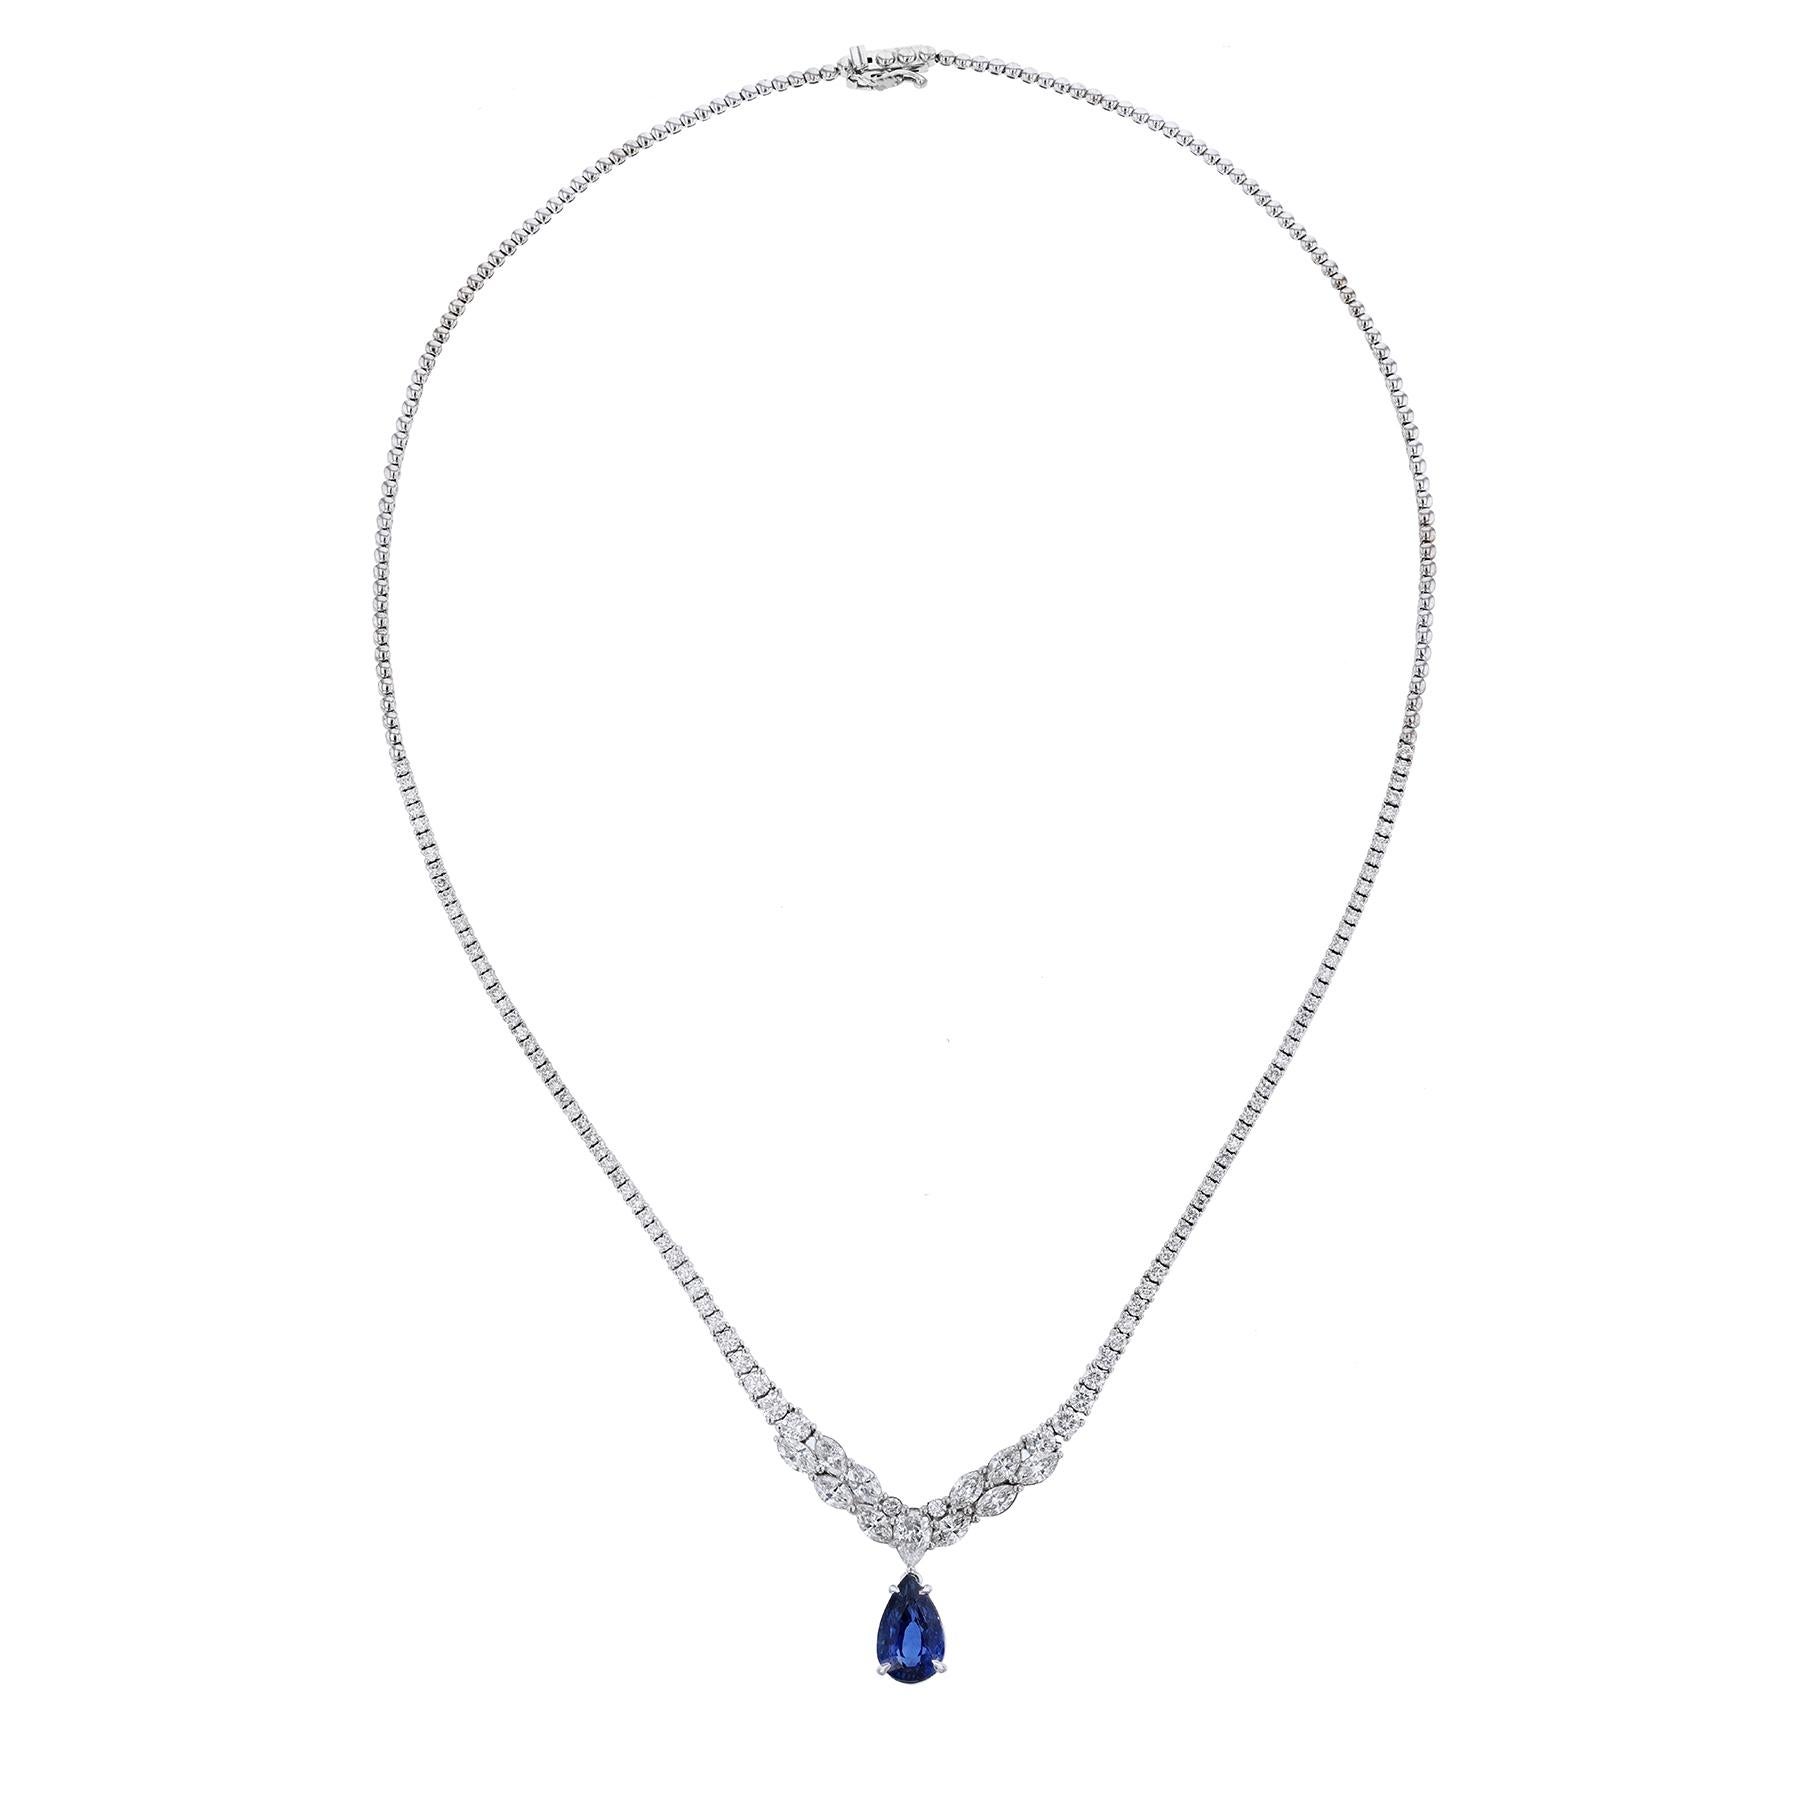 This necklace is made in 14K white gold and features a CDC Certified (CDC 170051) pear shape, 4.37 carat Natural Corundum Ceylon Blue Sapphire, from Sri Lanka. With a color grade (H).Attached to a classic diamond design that includes a center pear